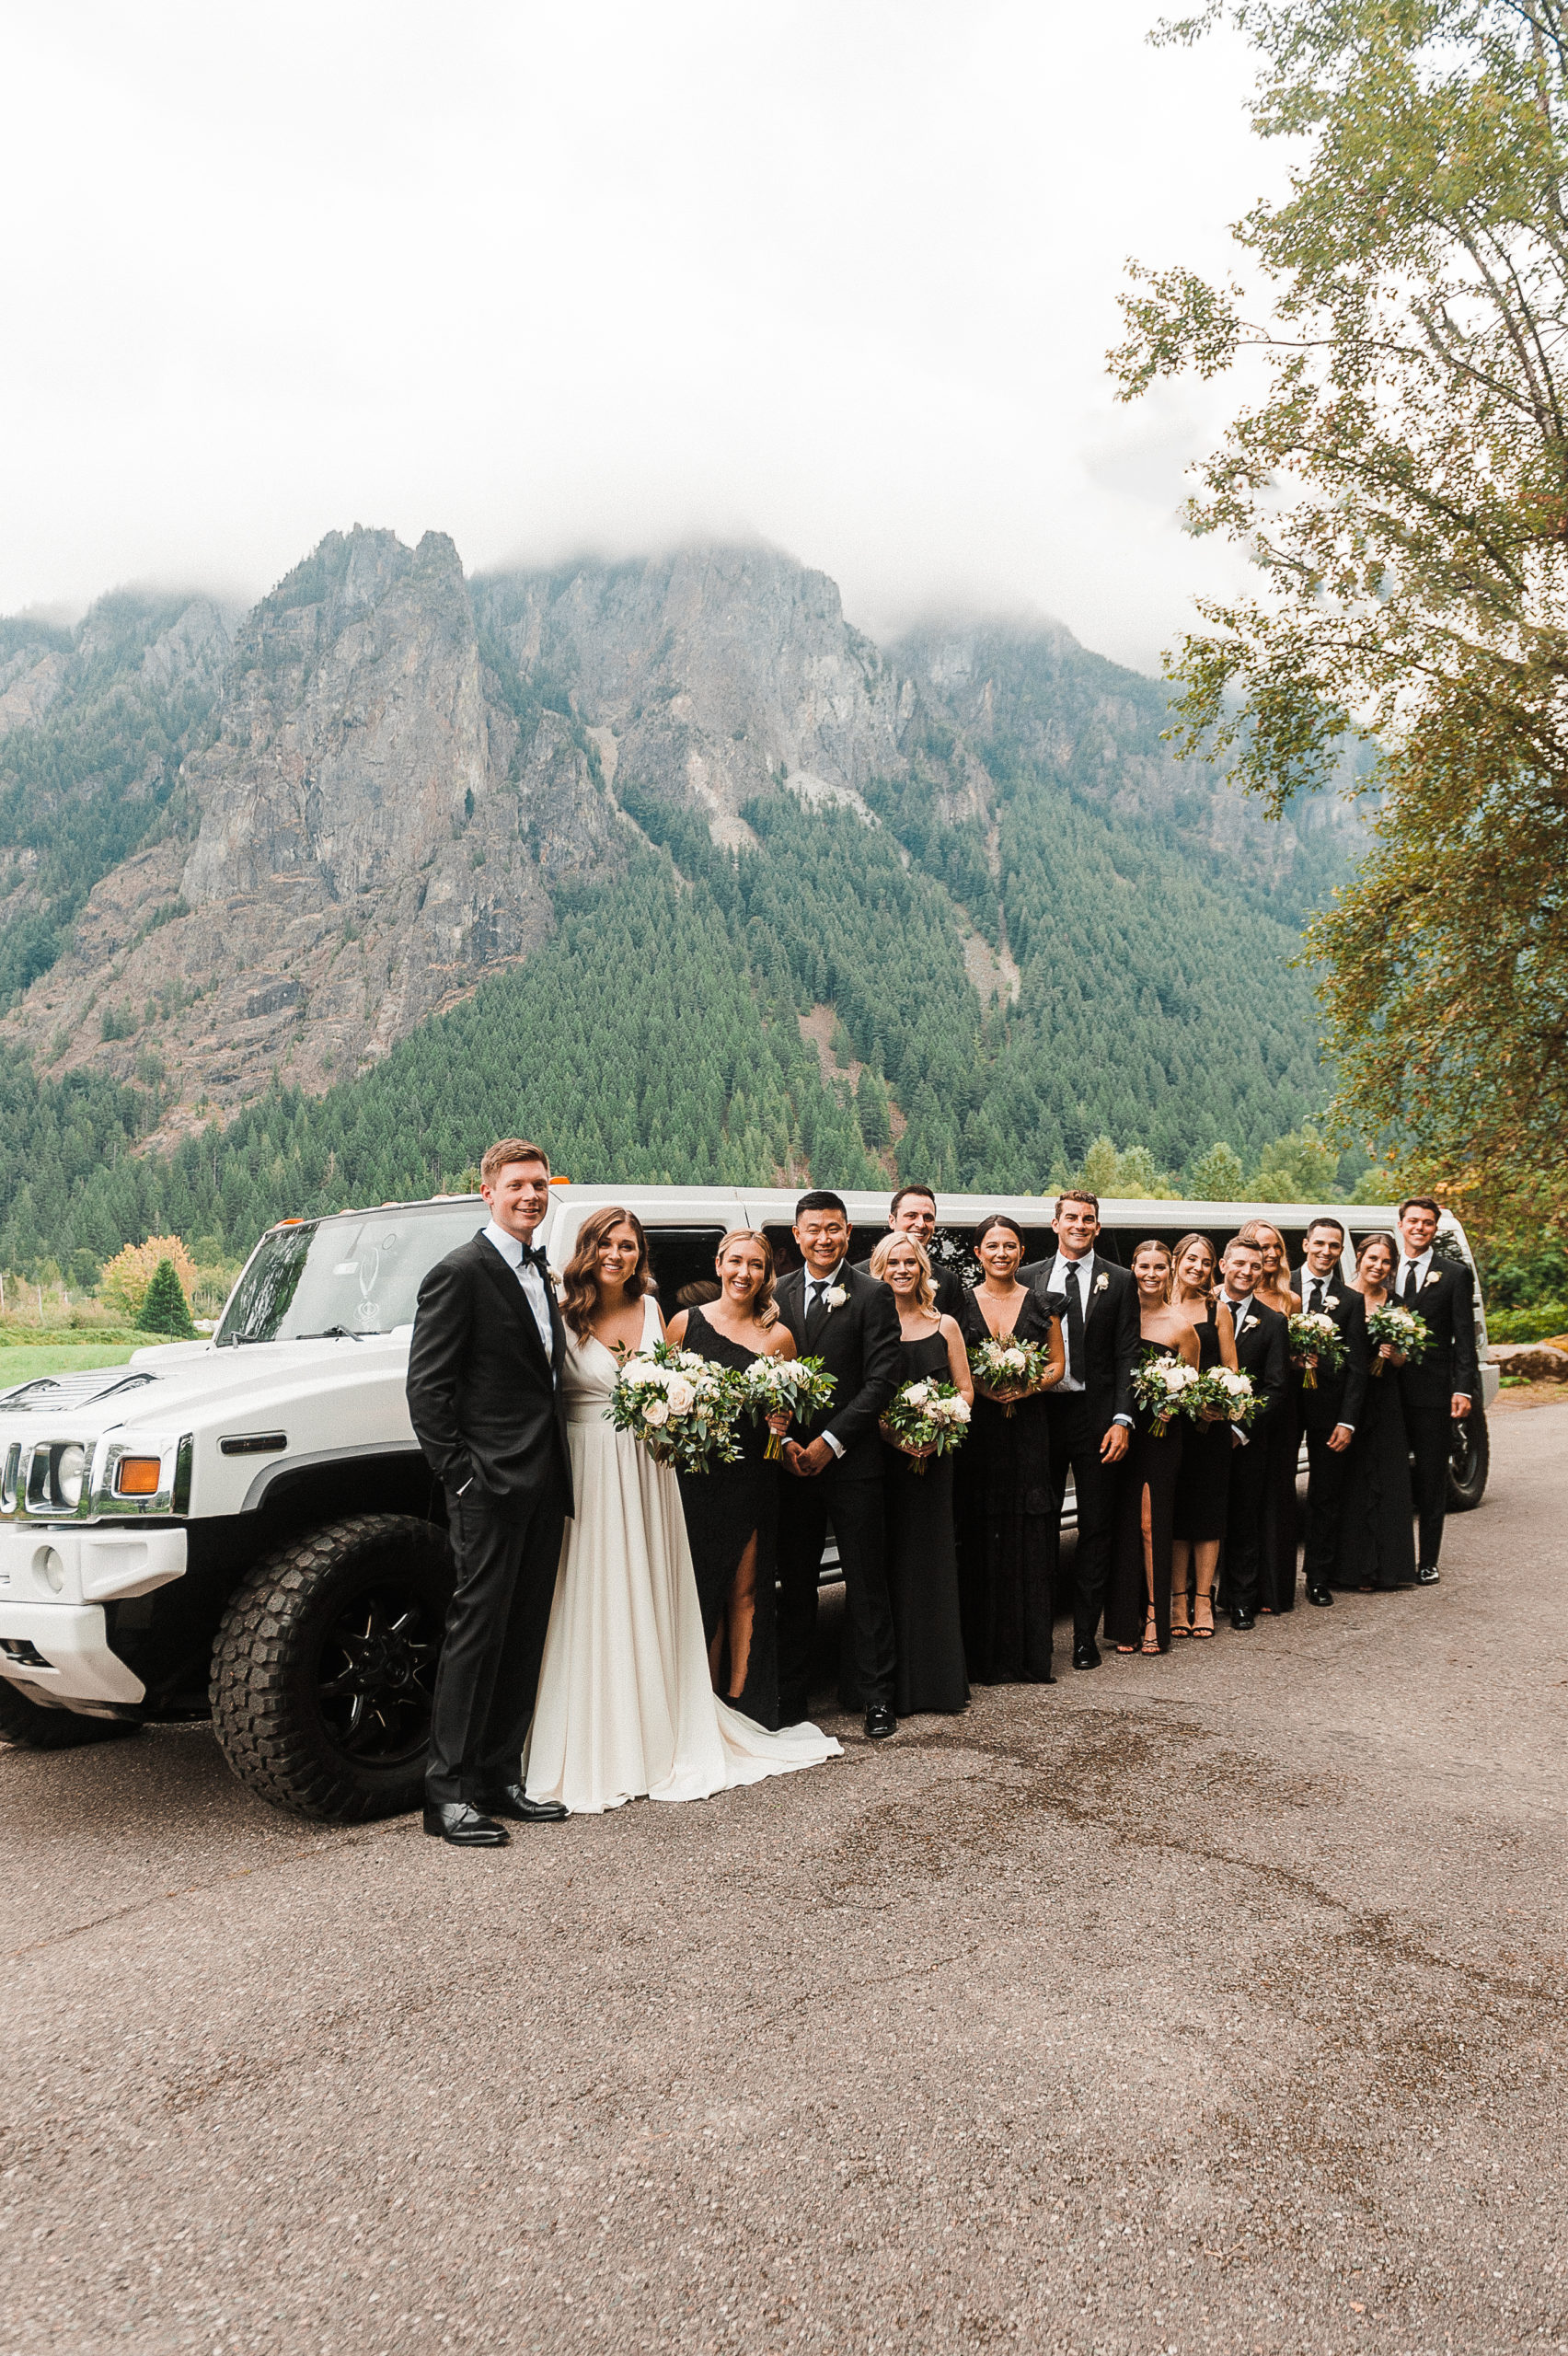 Wedding party standing in front of white hummer limousine at the base of the PNW mountains